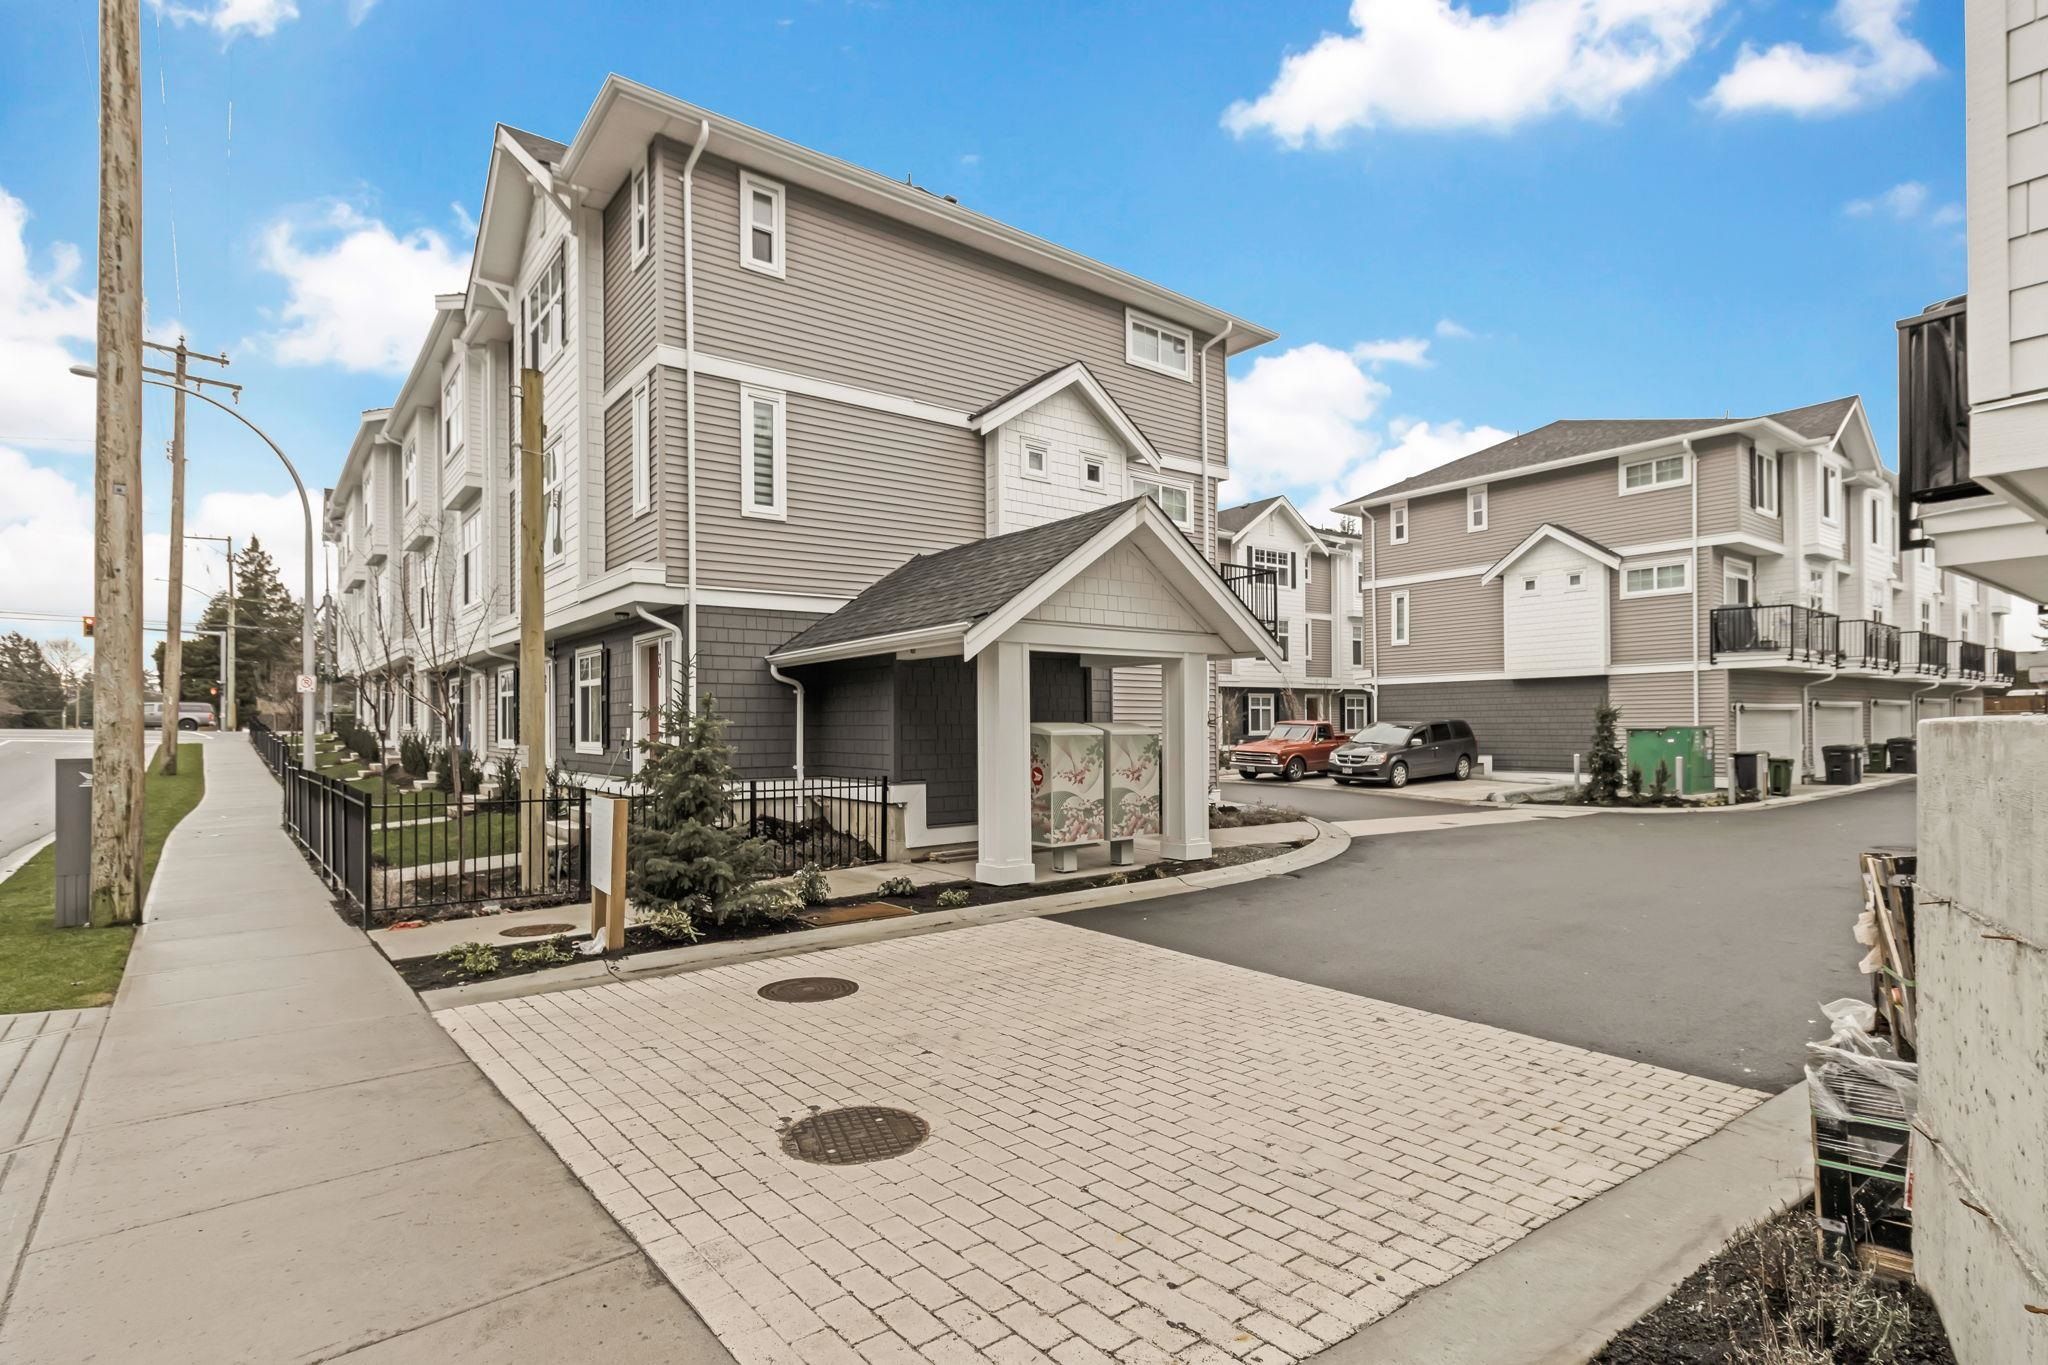 Main Photo: 14 2033 MCKENZIE ROAD in : Central Abbotsford Townhouse for sale : MLS®# R2649623